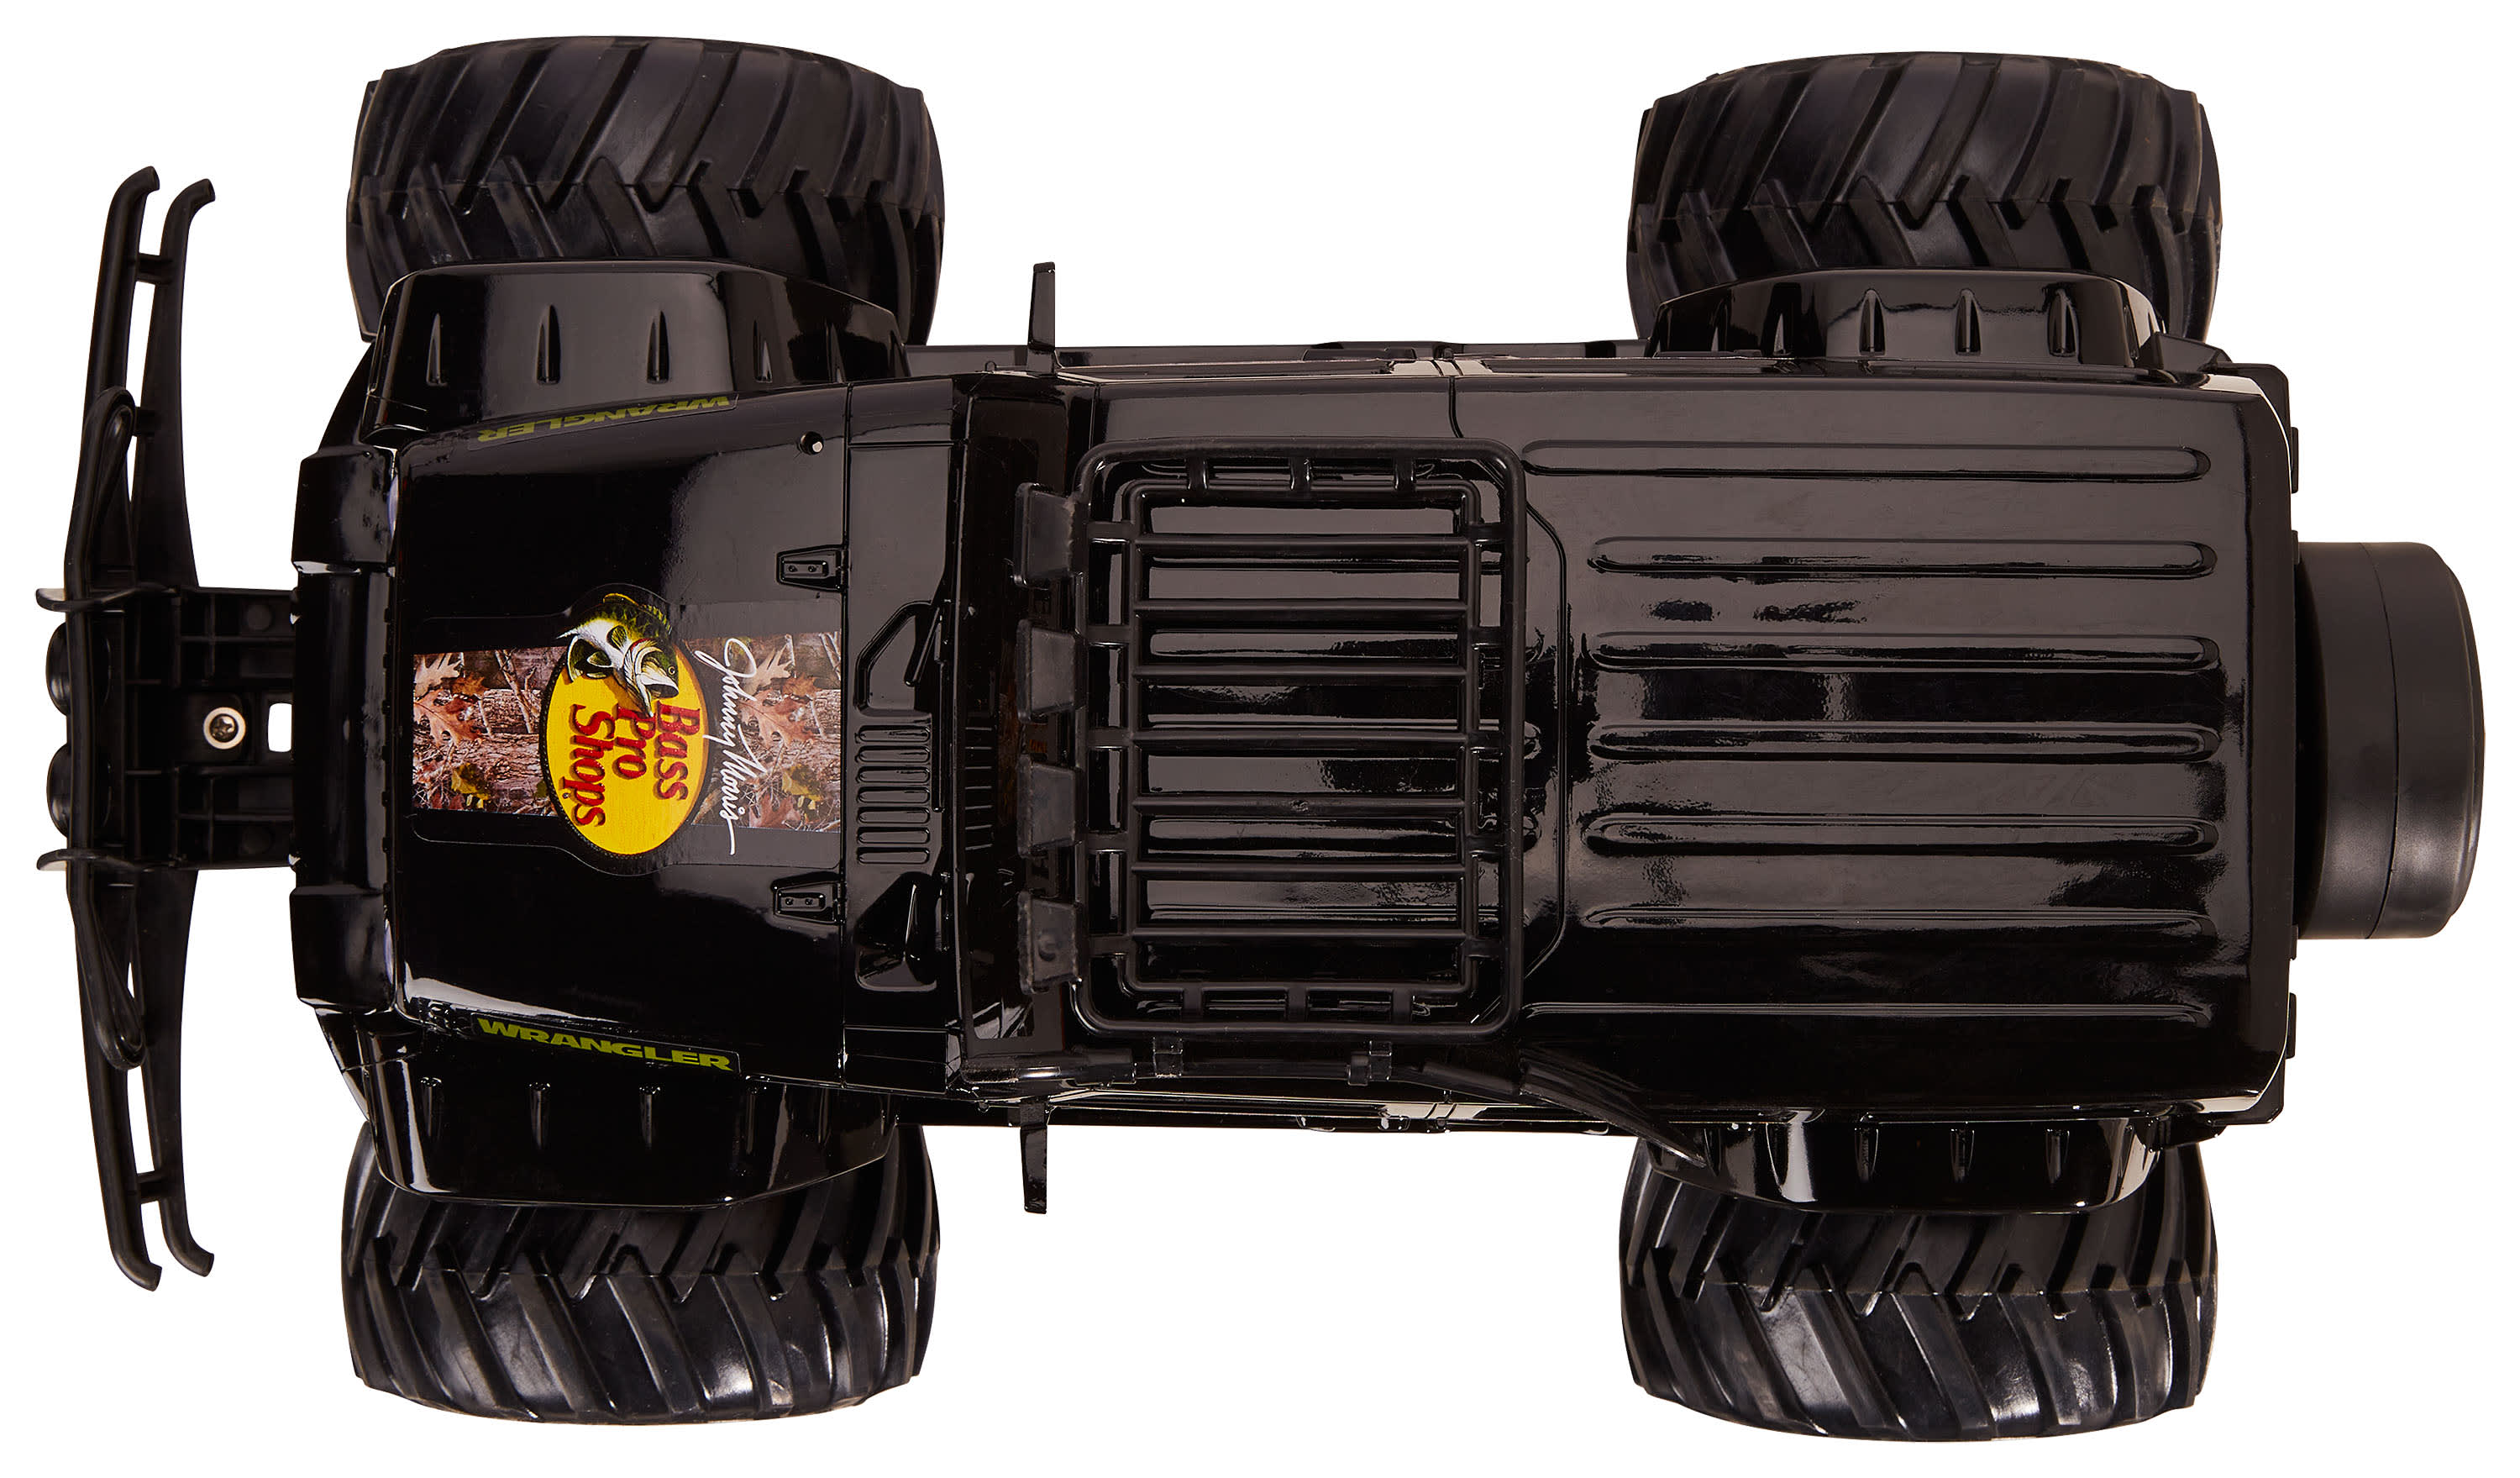 Bass Pro Shops® 1:12 Jeep® Wrangler 4×4 Remote-Control Off-Road Truck